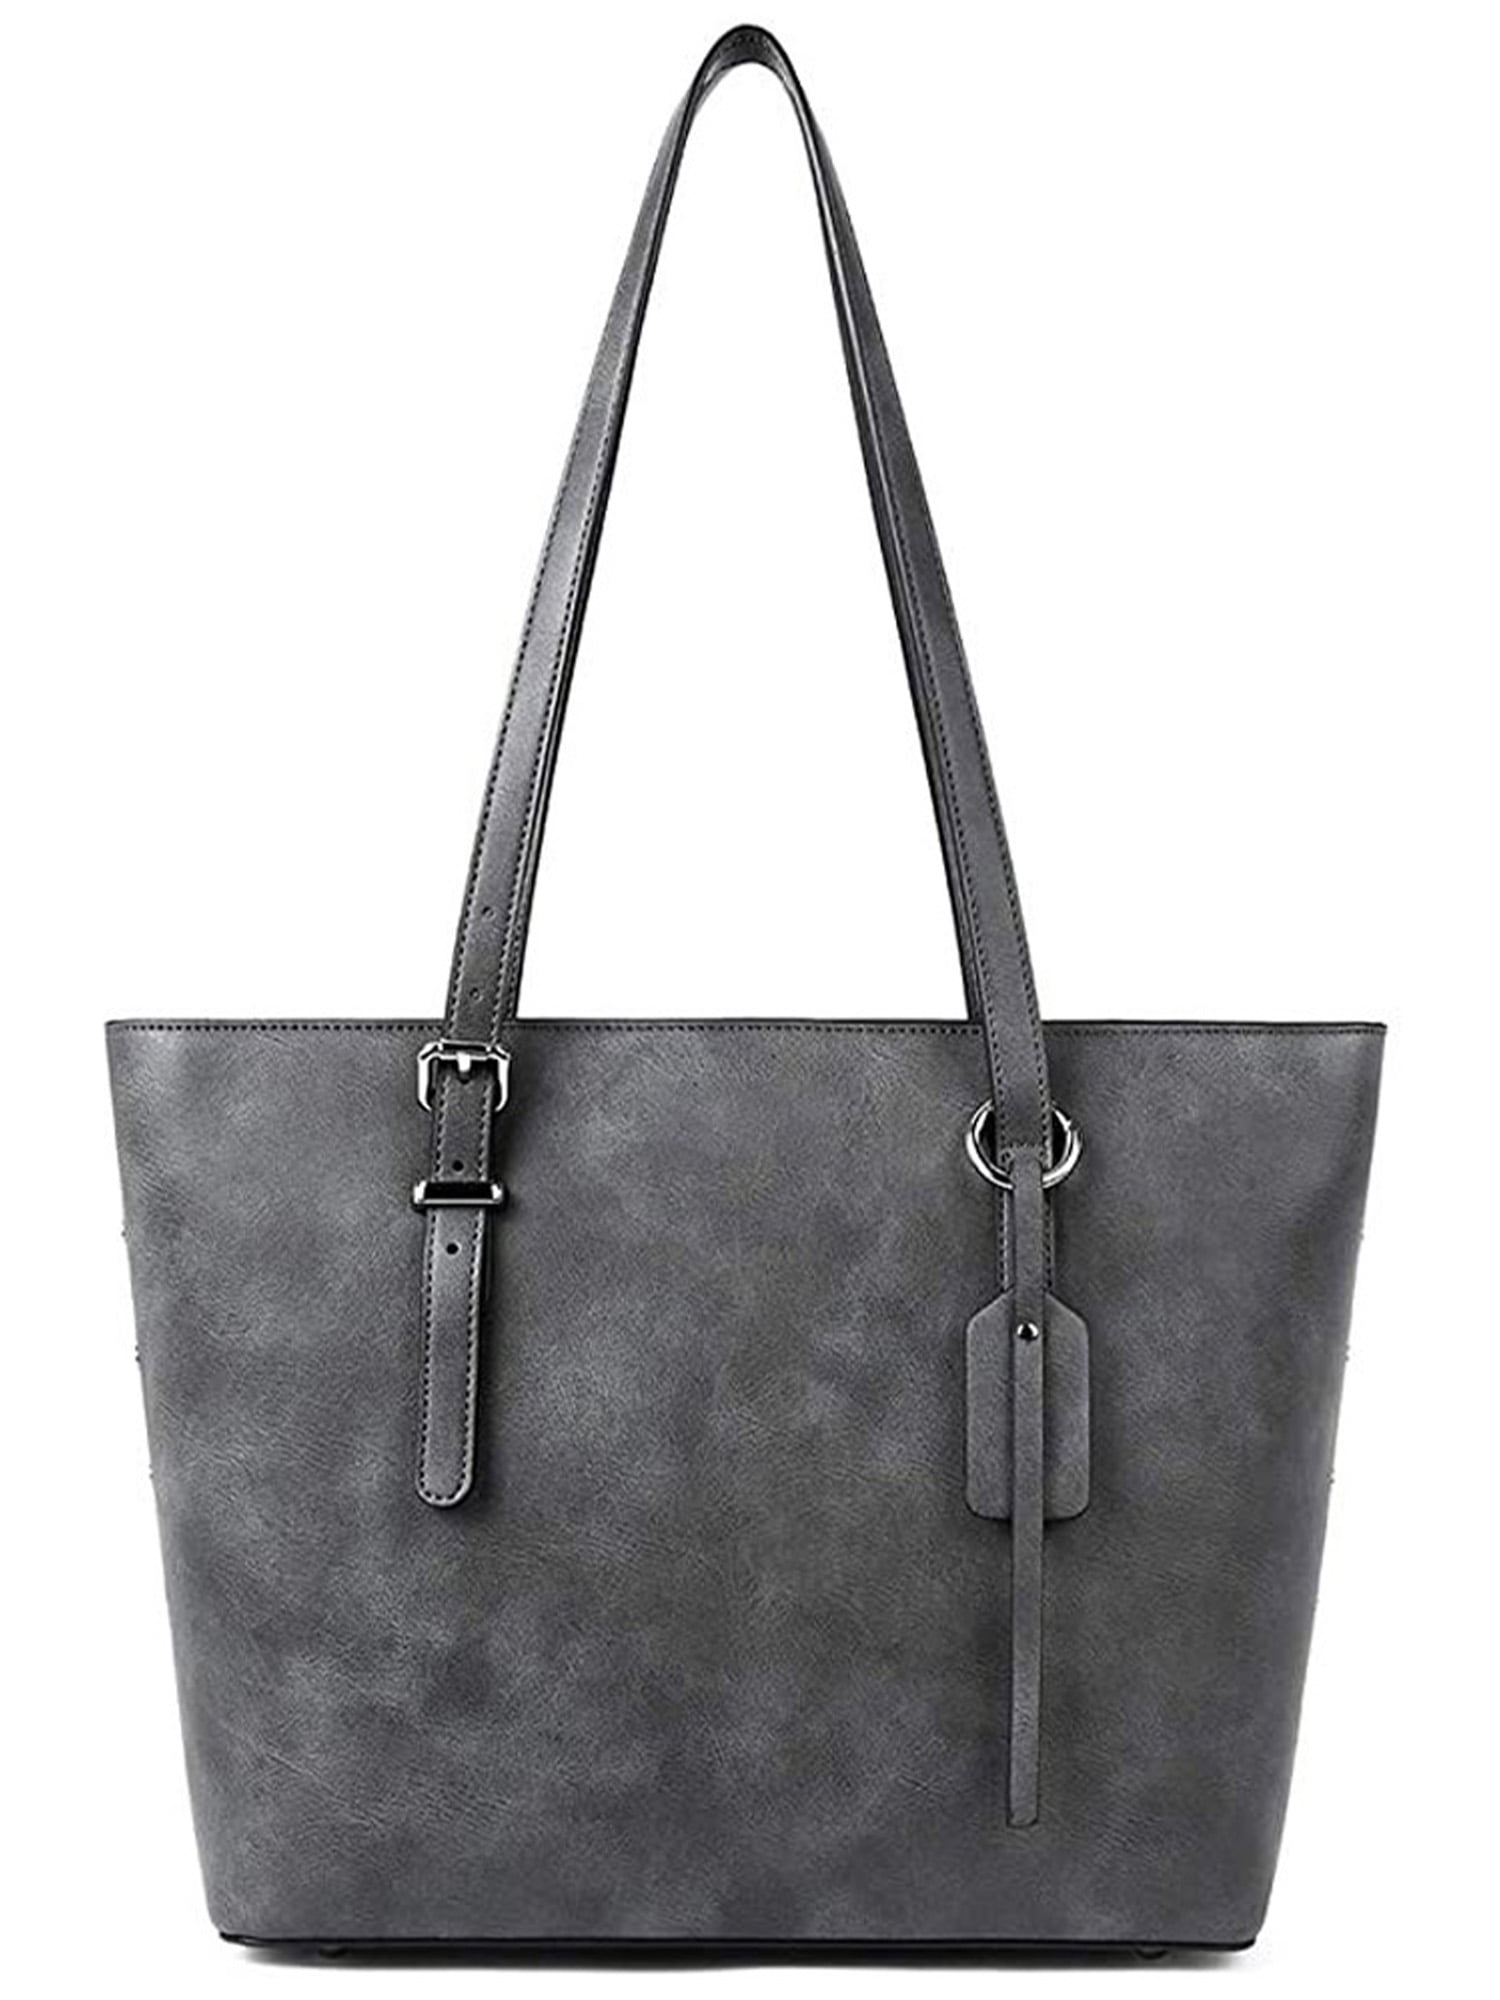  WESTBRONCO Bundle Women Leather Handbags Purses Designer Tote  Shoulder Bag Top Handle Bag for Daily Work Travel Grey and Black :  Clothing, Shoes & Jewelry